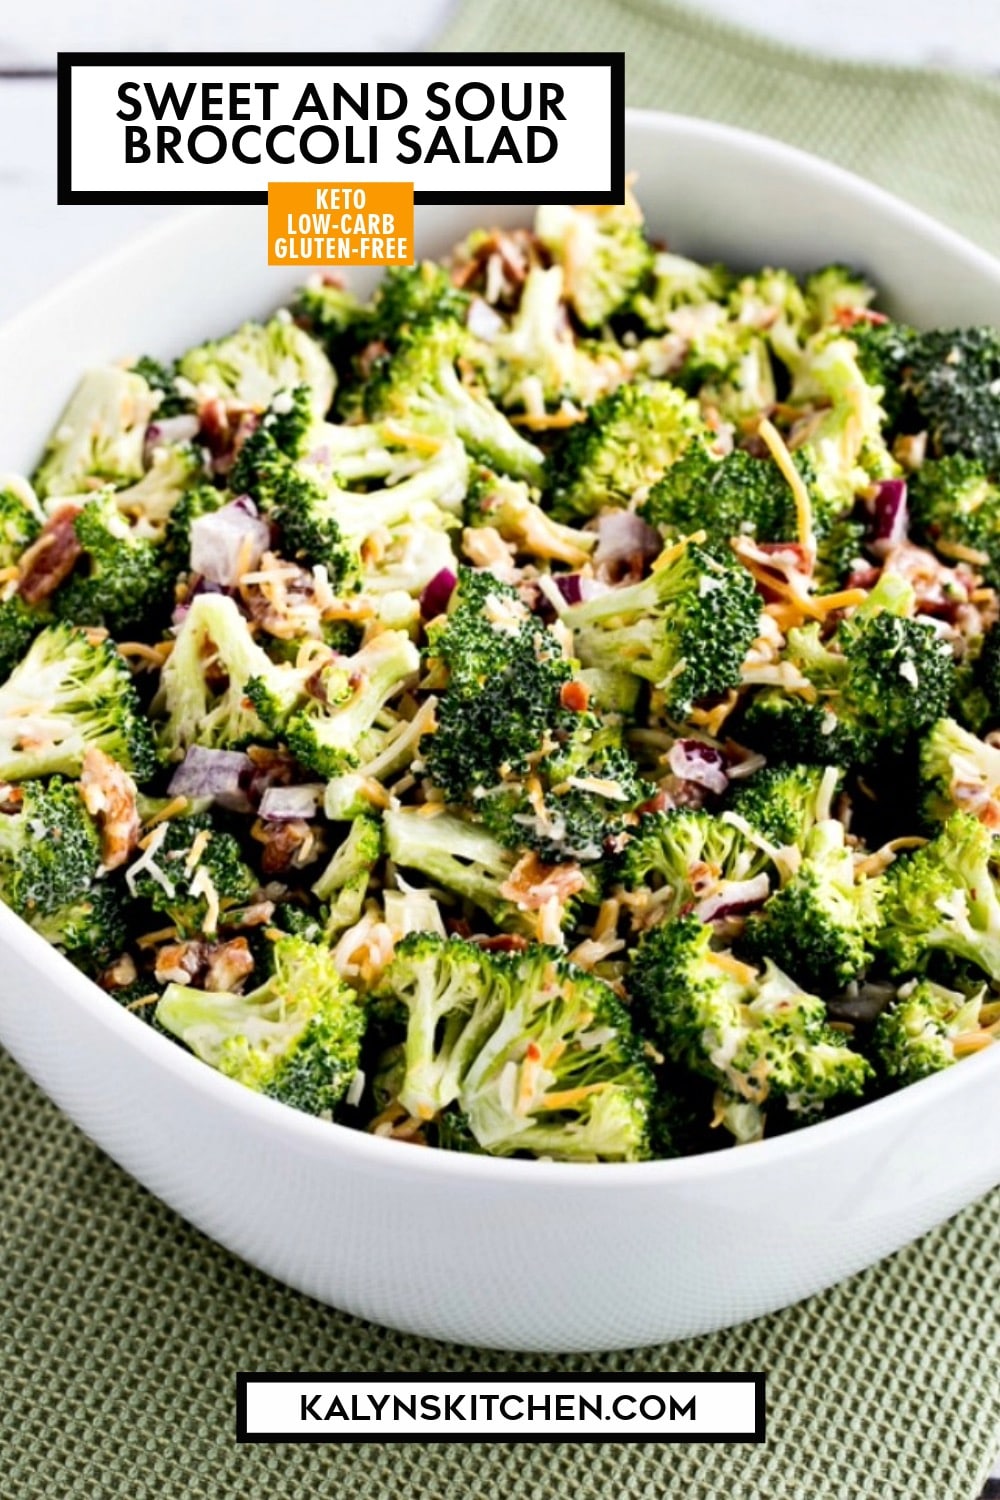 Pinterest image of Sweet and Sour Broccoli Salad